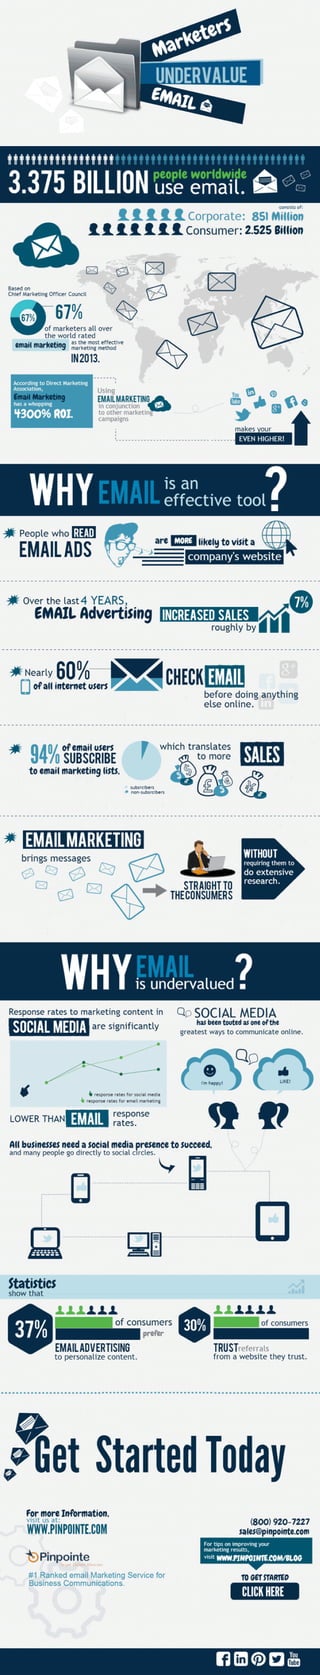 Infographic: Marketers Undervalue Email